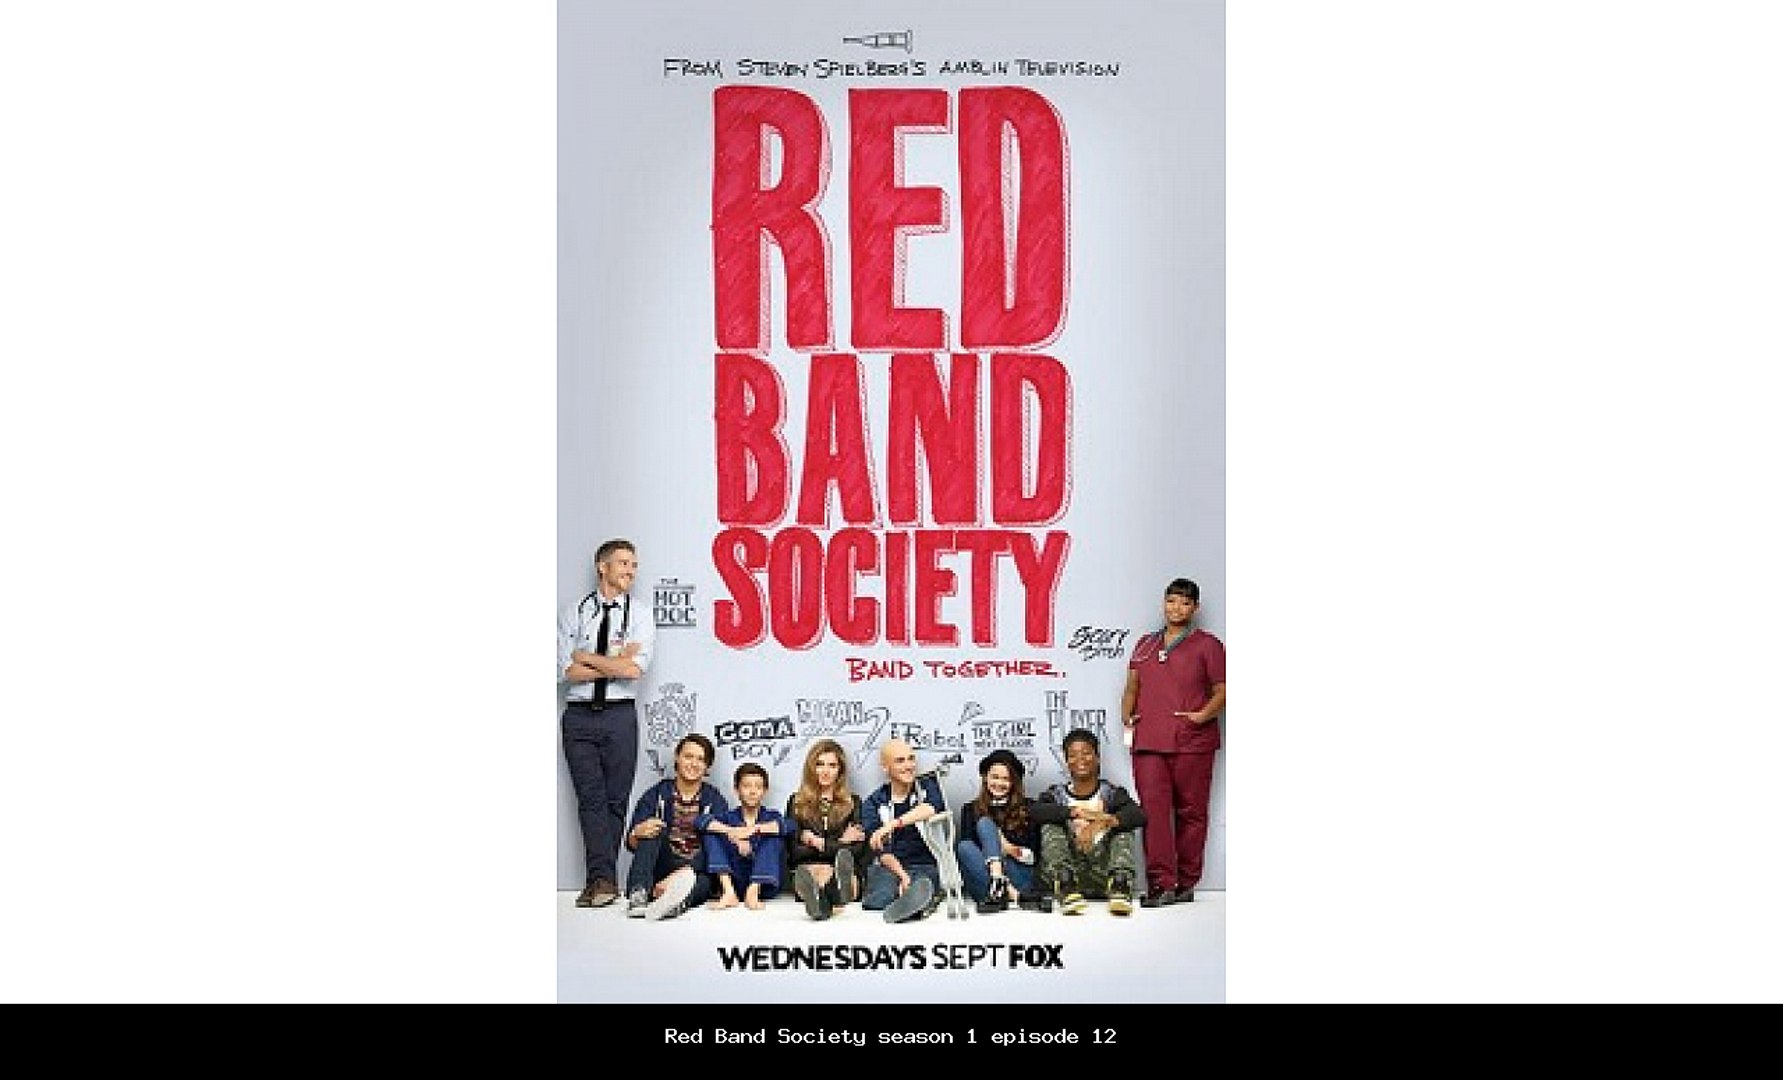 Red Band Society season 1 episode 12 s1e12 - Dailymotion Video